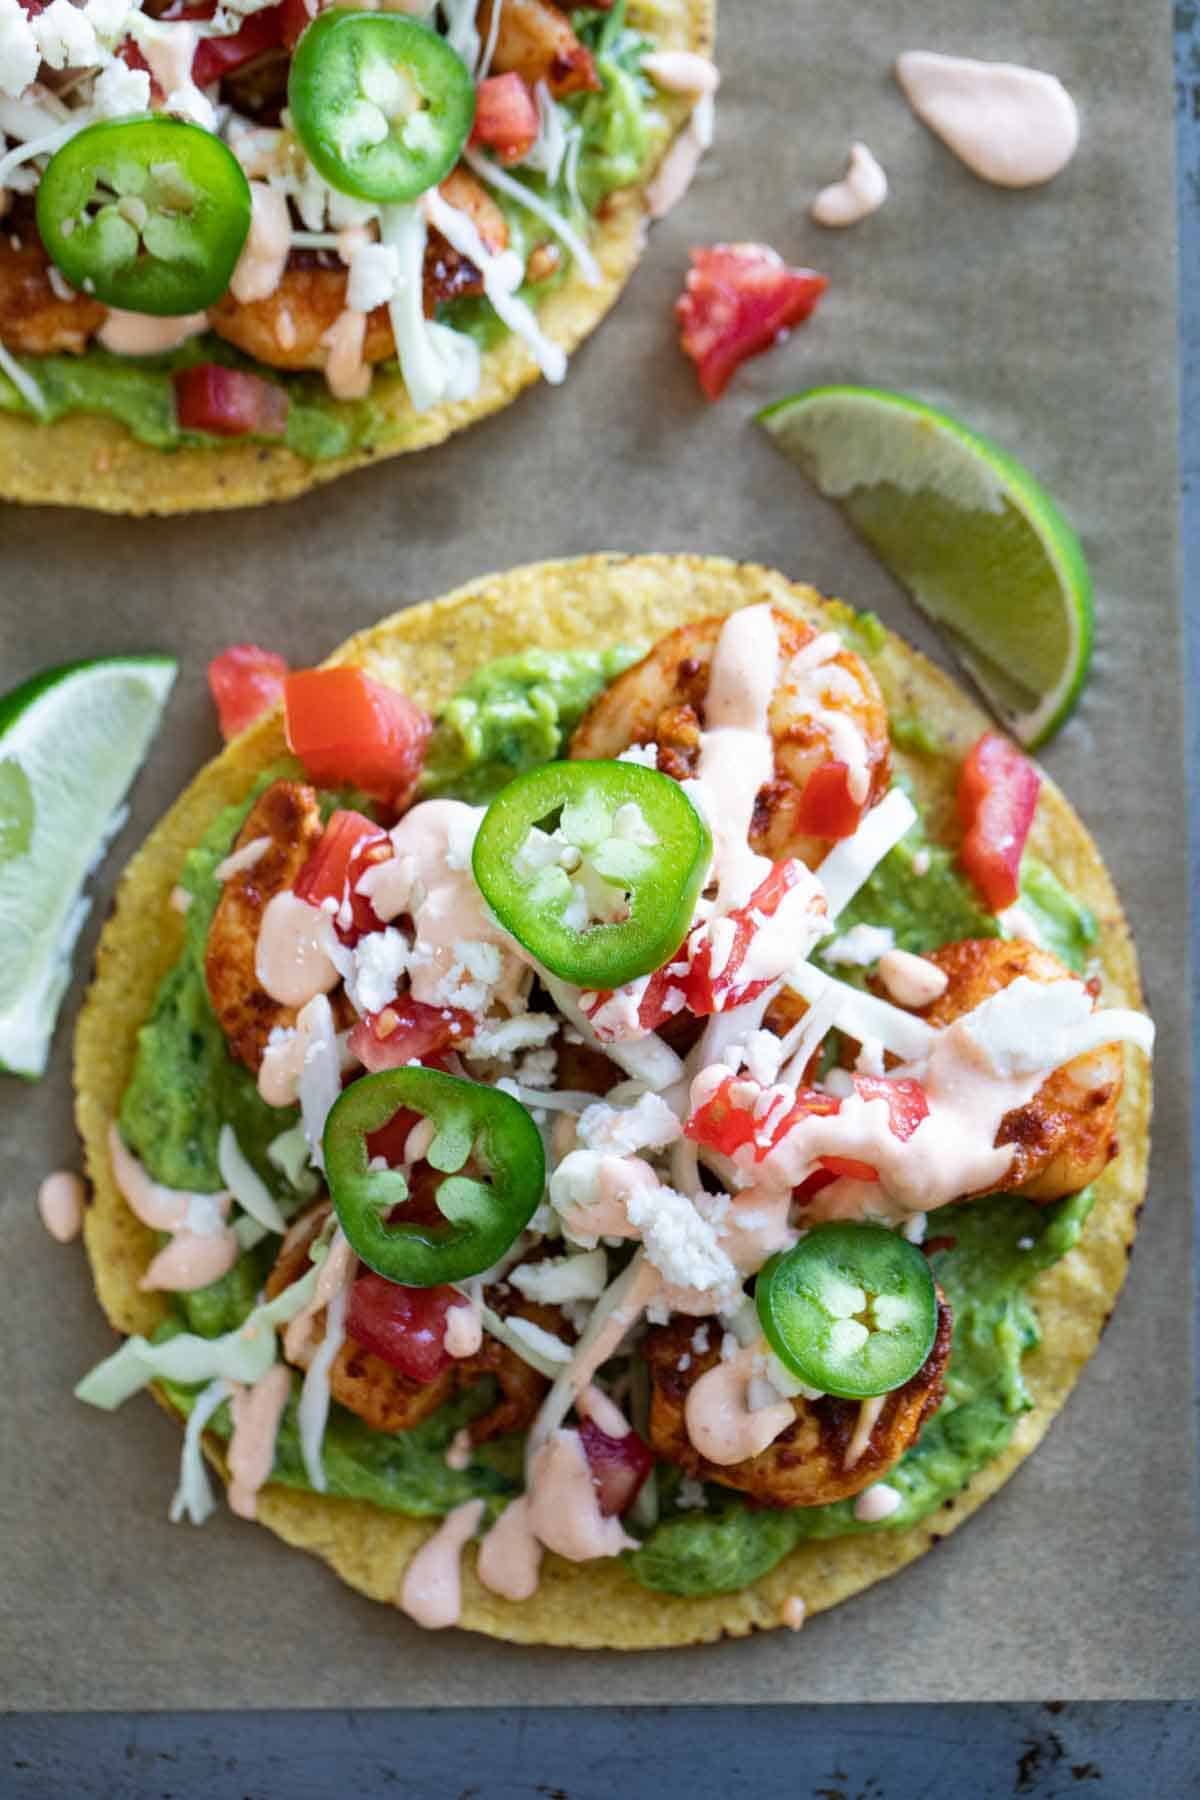 Two shrimp tostadas topped with cabbage, tomatoes, jalapenos, cheese, and sauce.